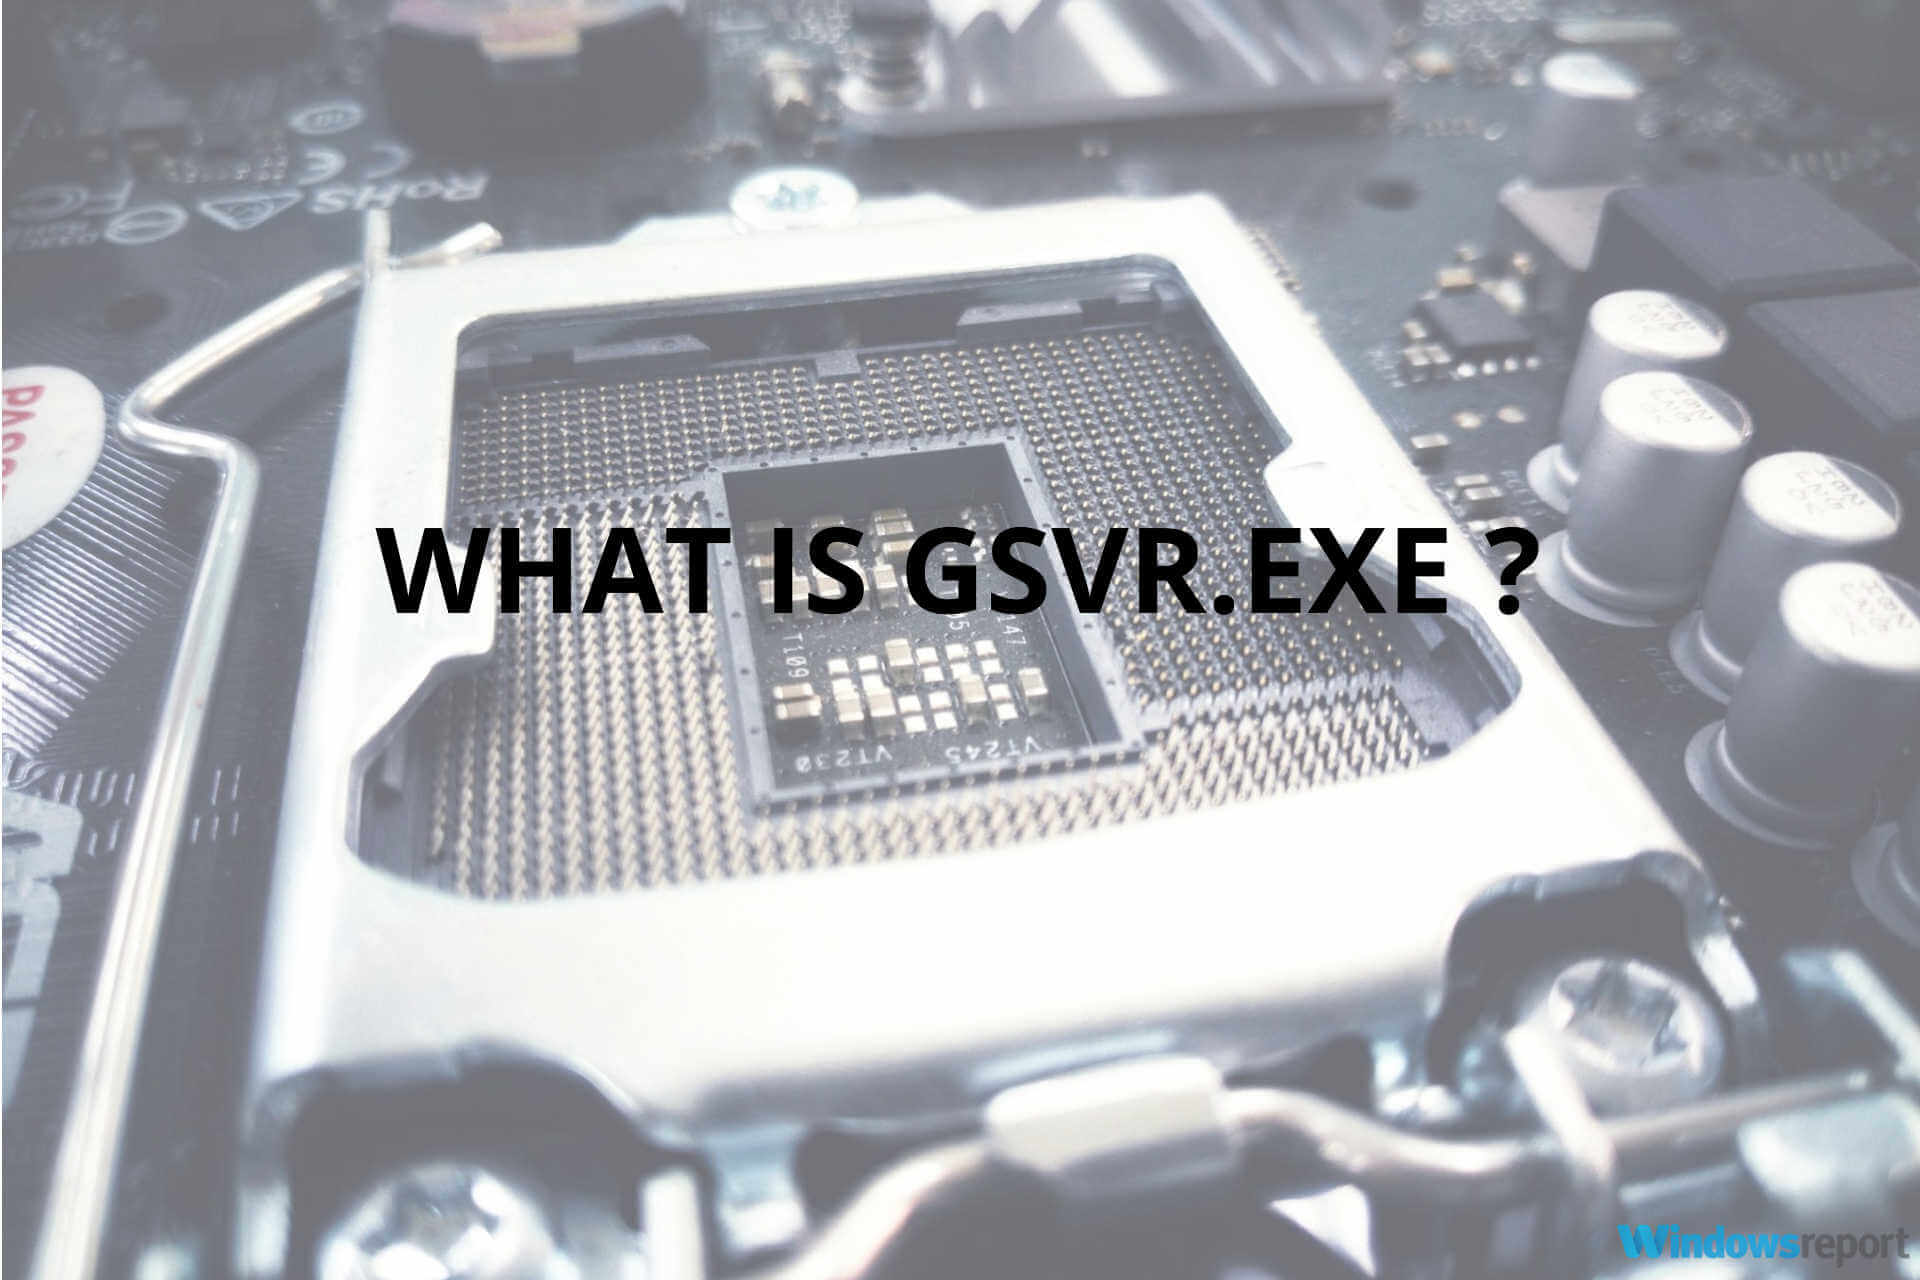 What is GSvr.exe and how to fix high CPU usage